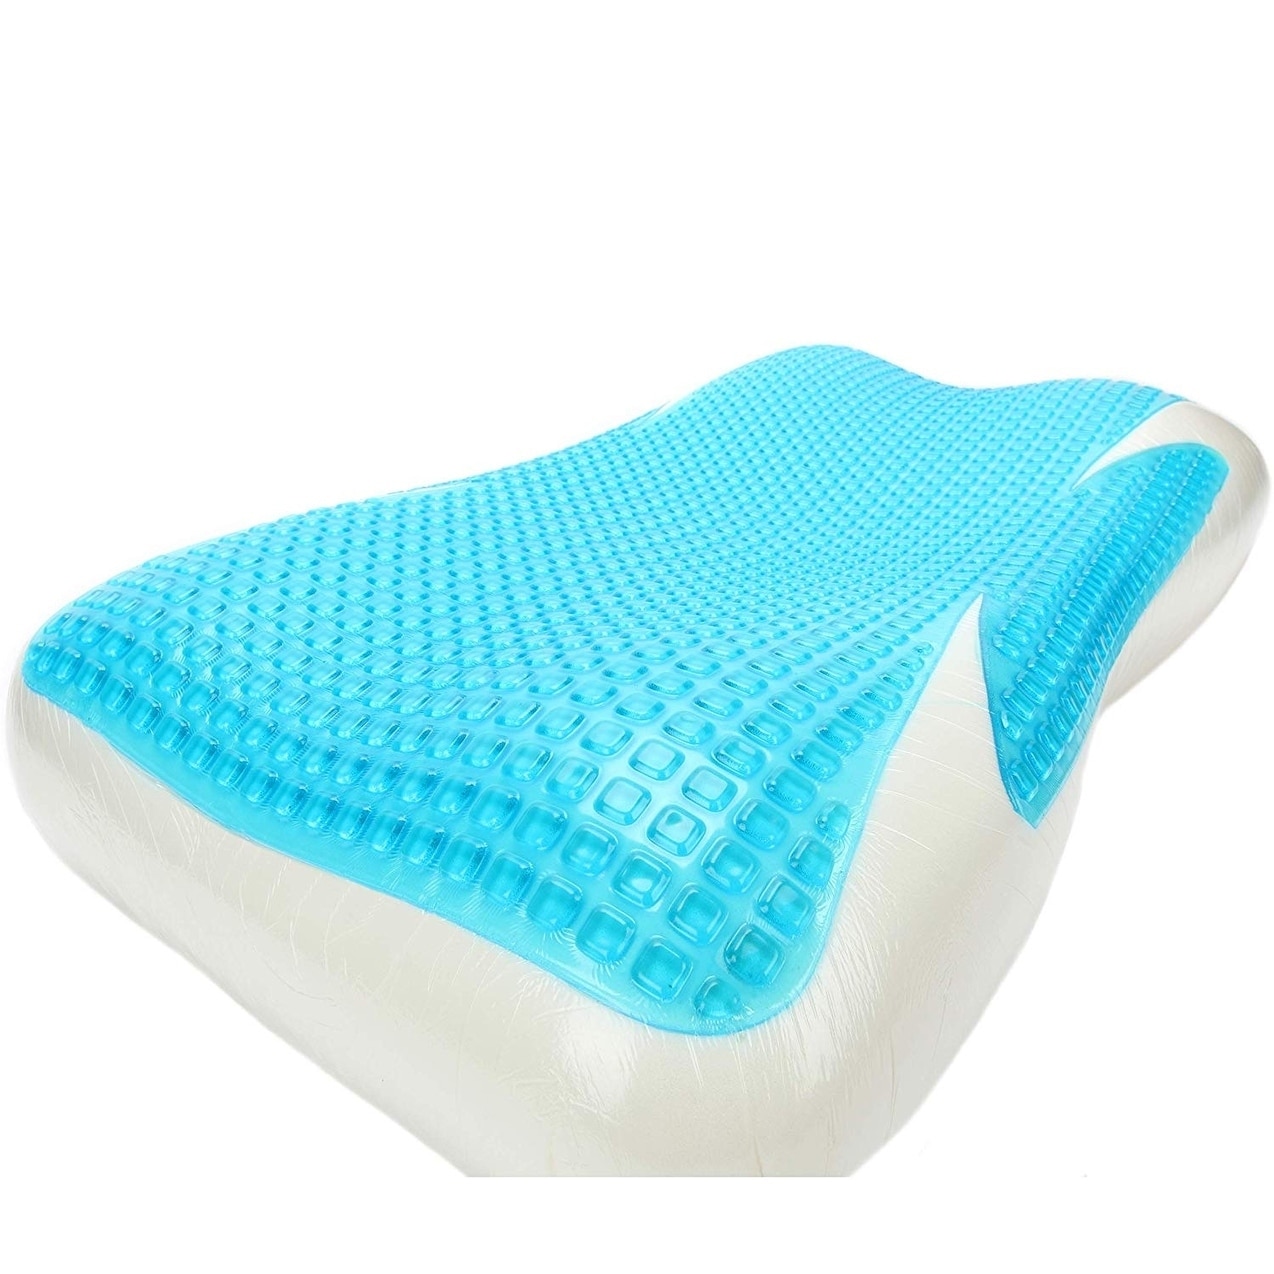 Cooling Gel Pillow Chilled Natural Comfort Sleeping Aid Body Cool